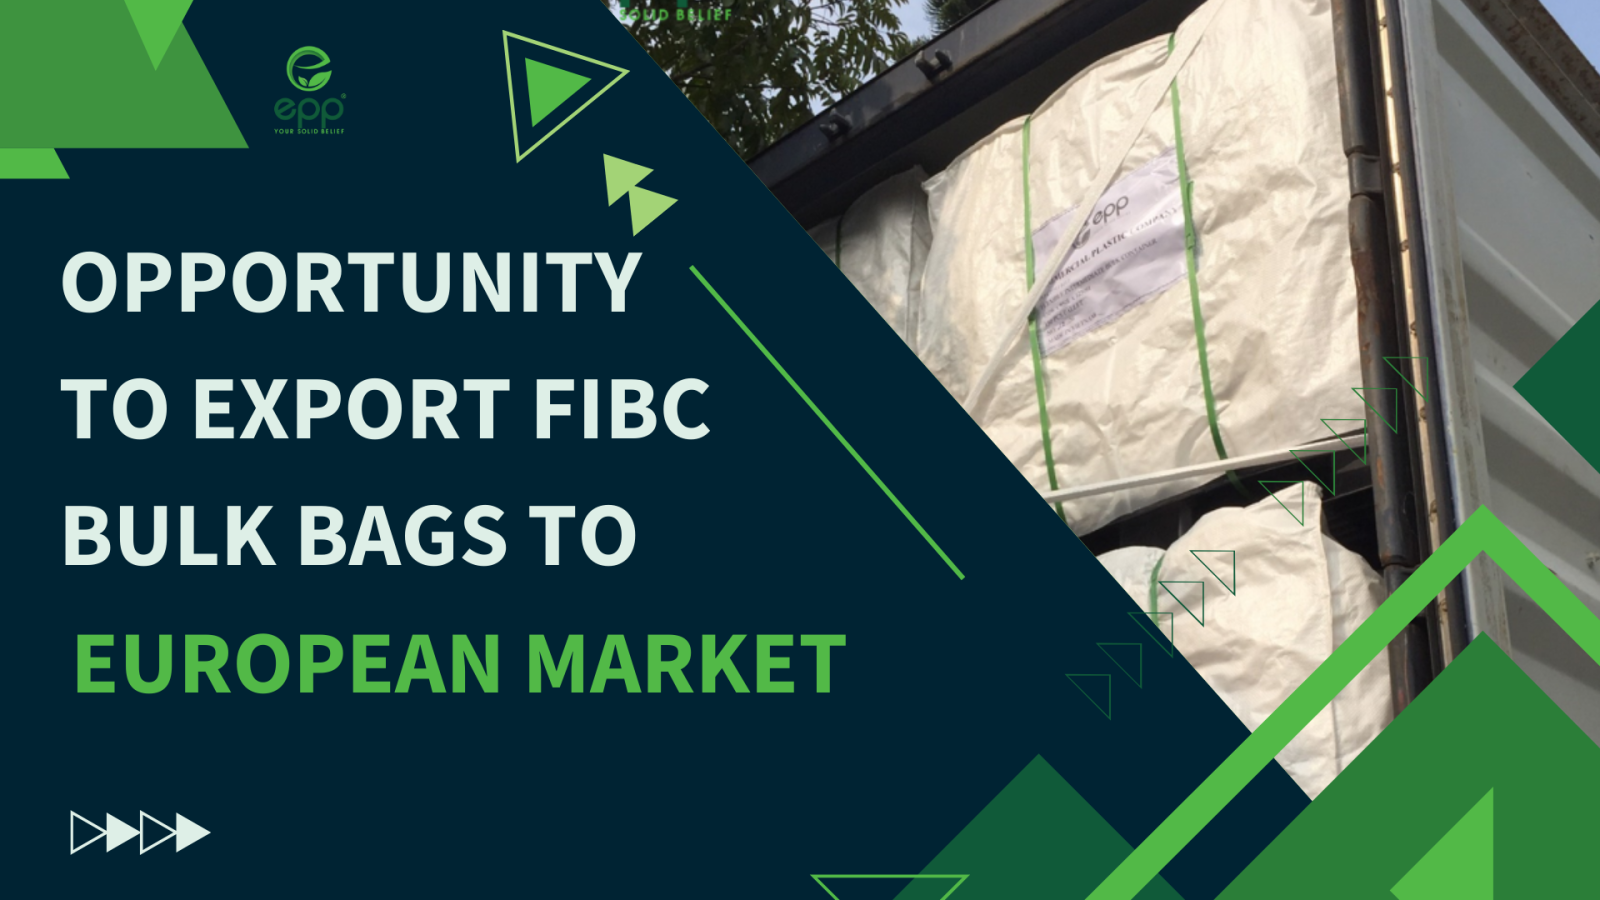 Opportunity-to-export-fibc-bulk-bags-to-the-European-market.png